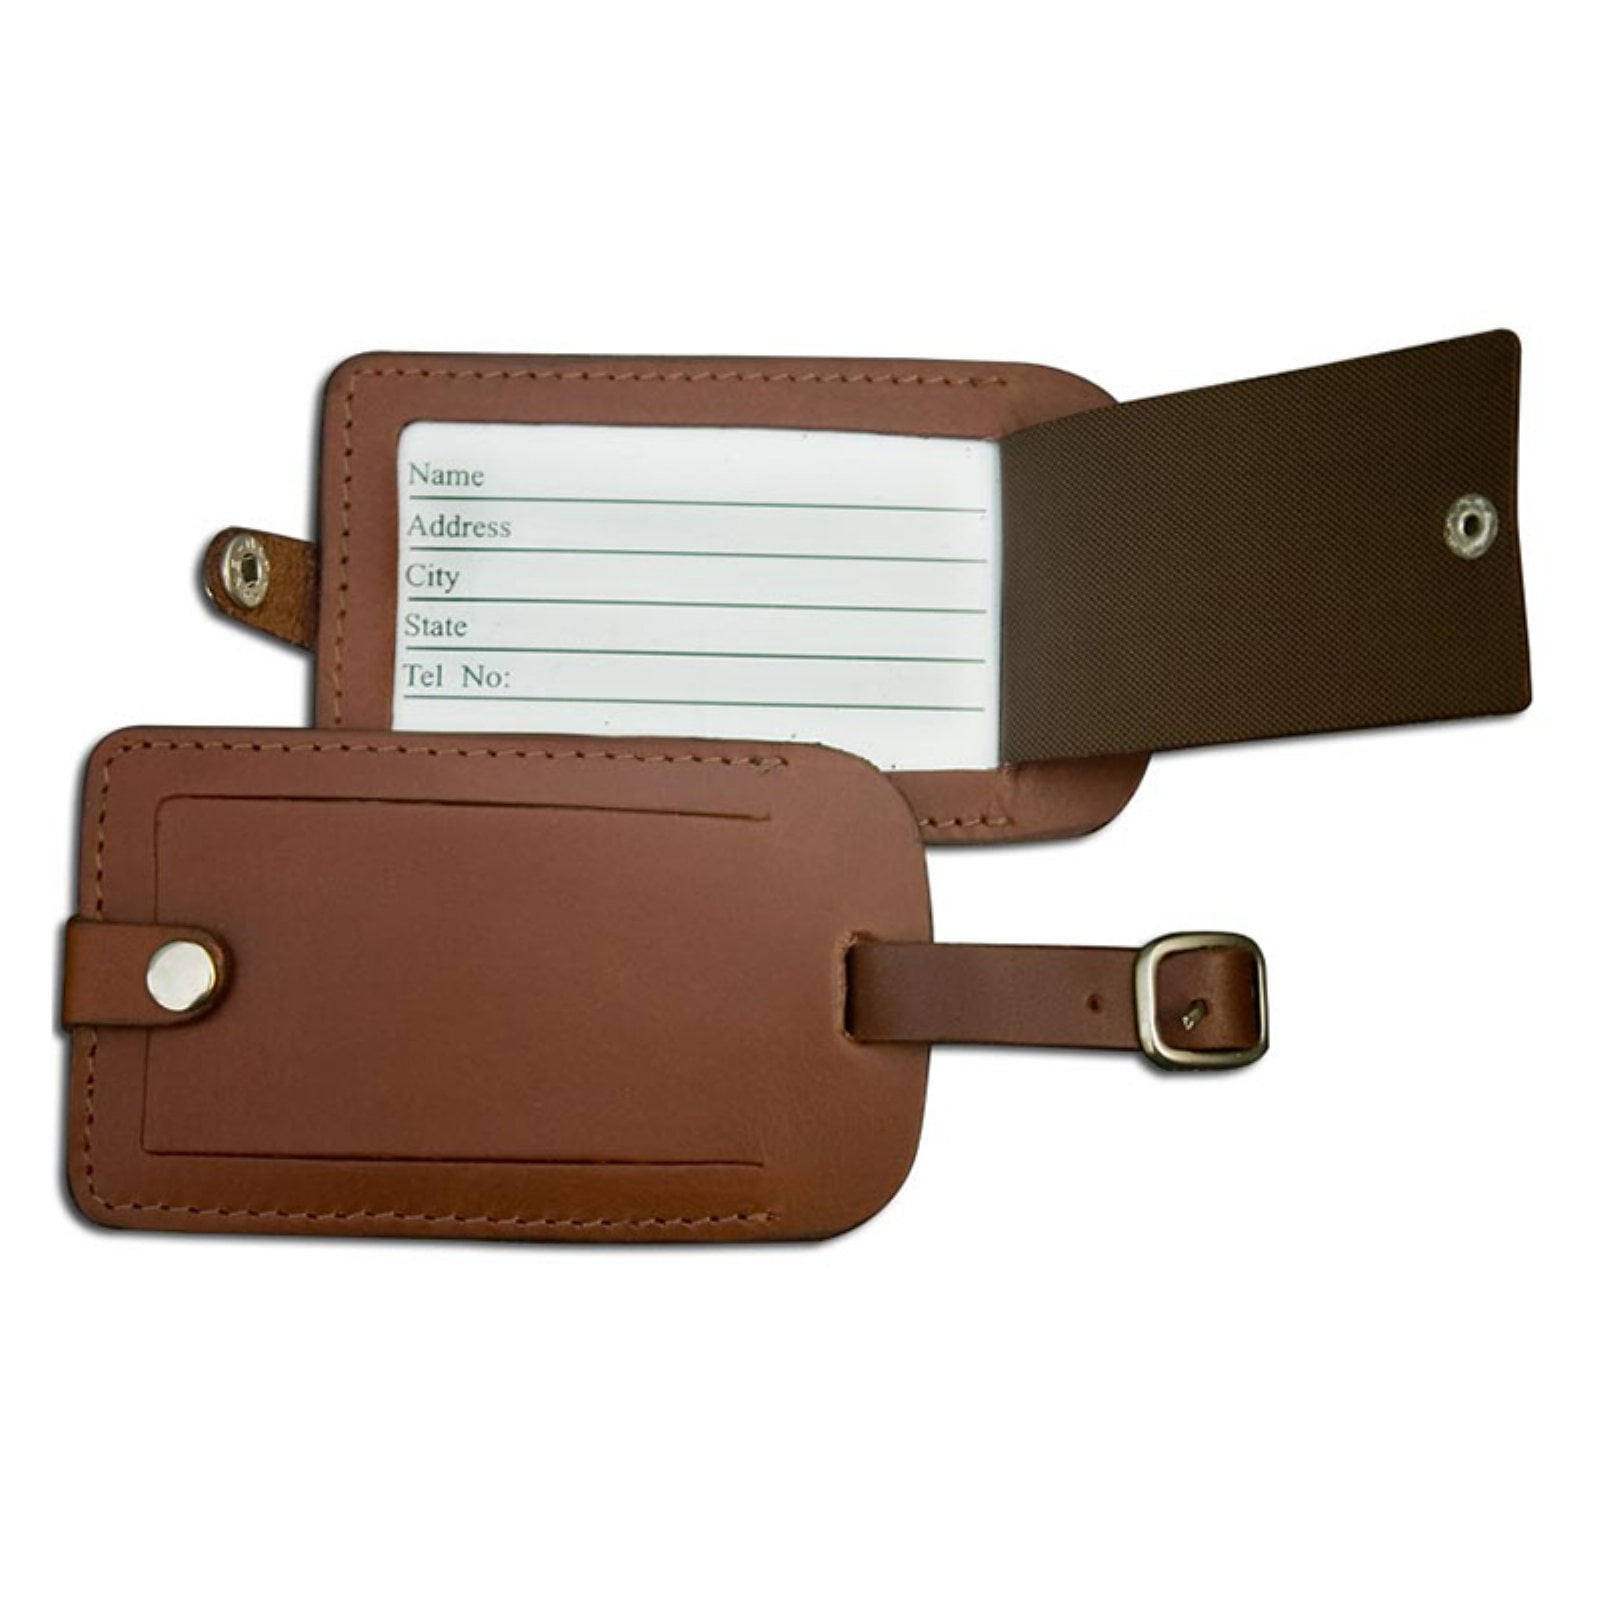 Rectangle Leather Tags – LITTLELASERCO